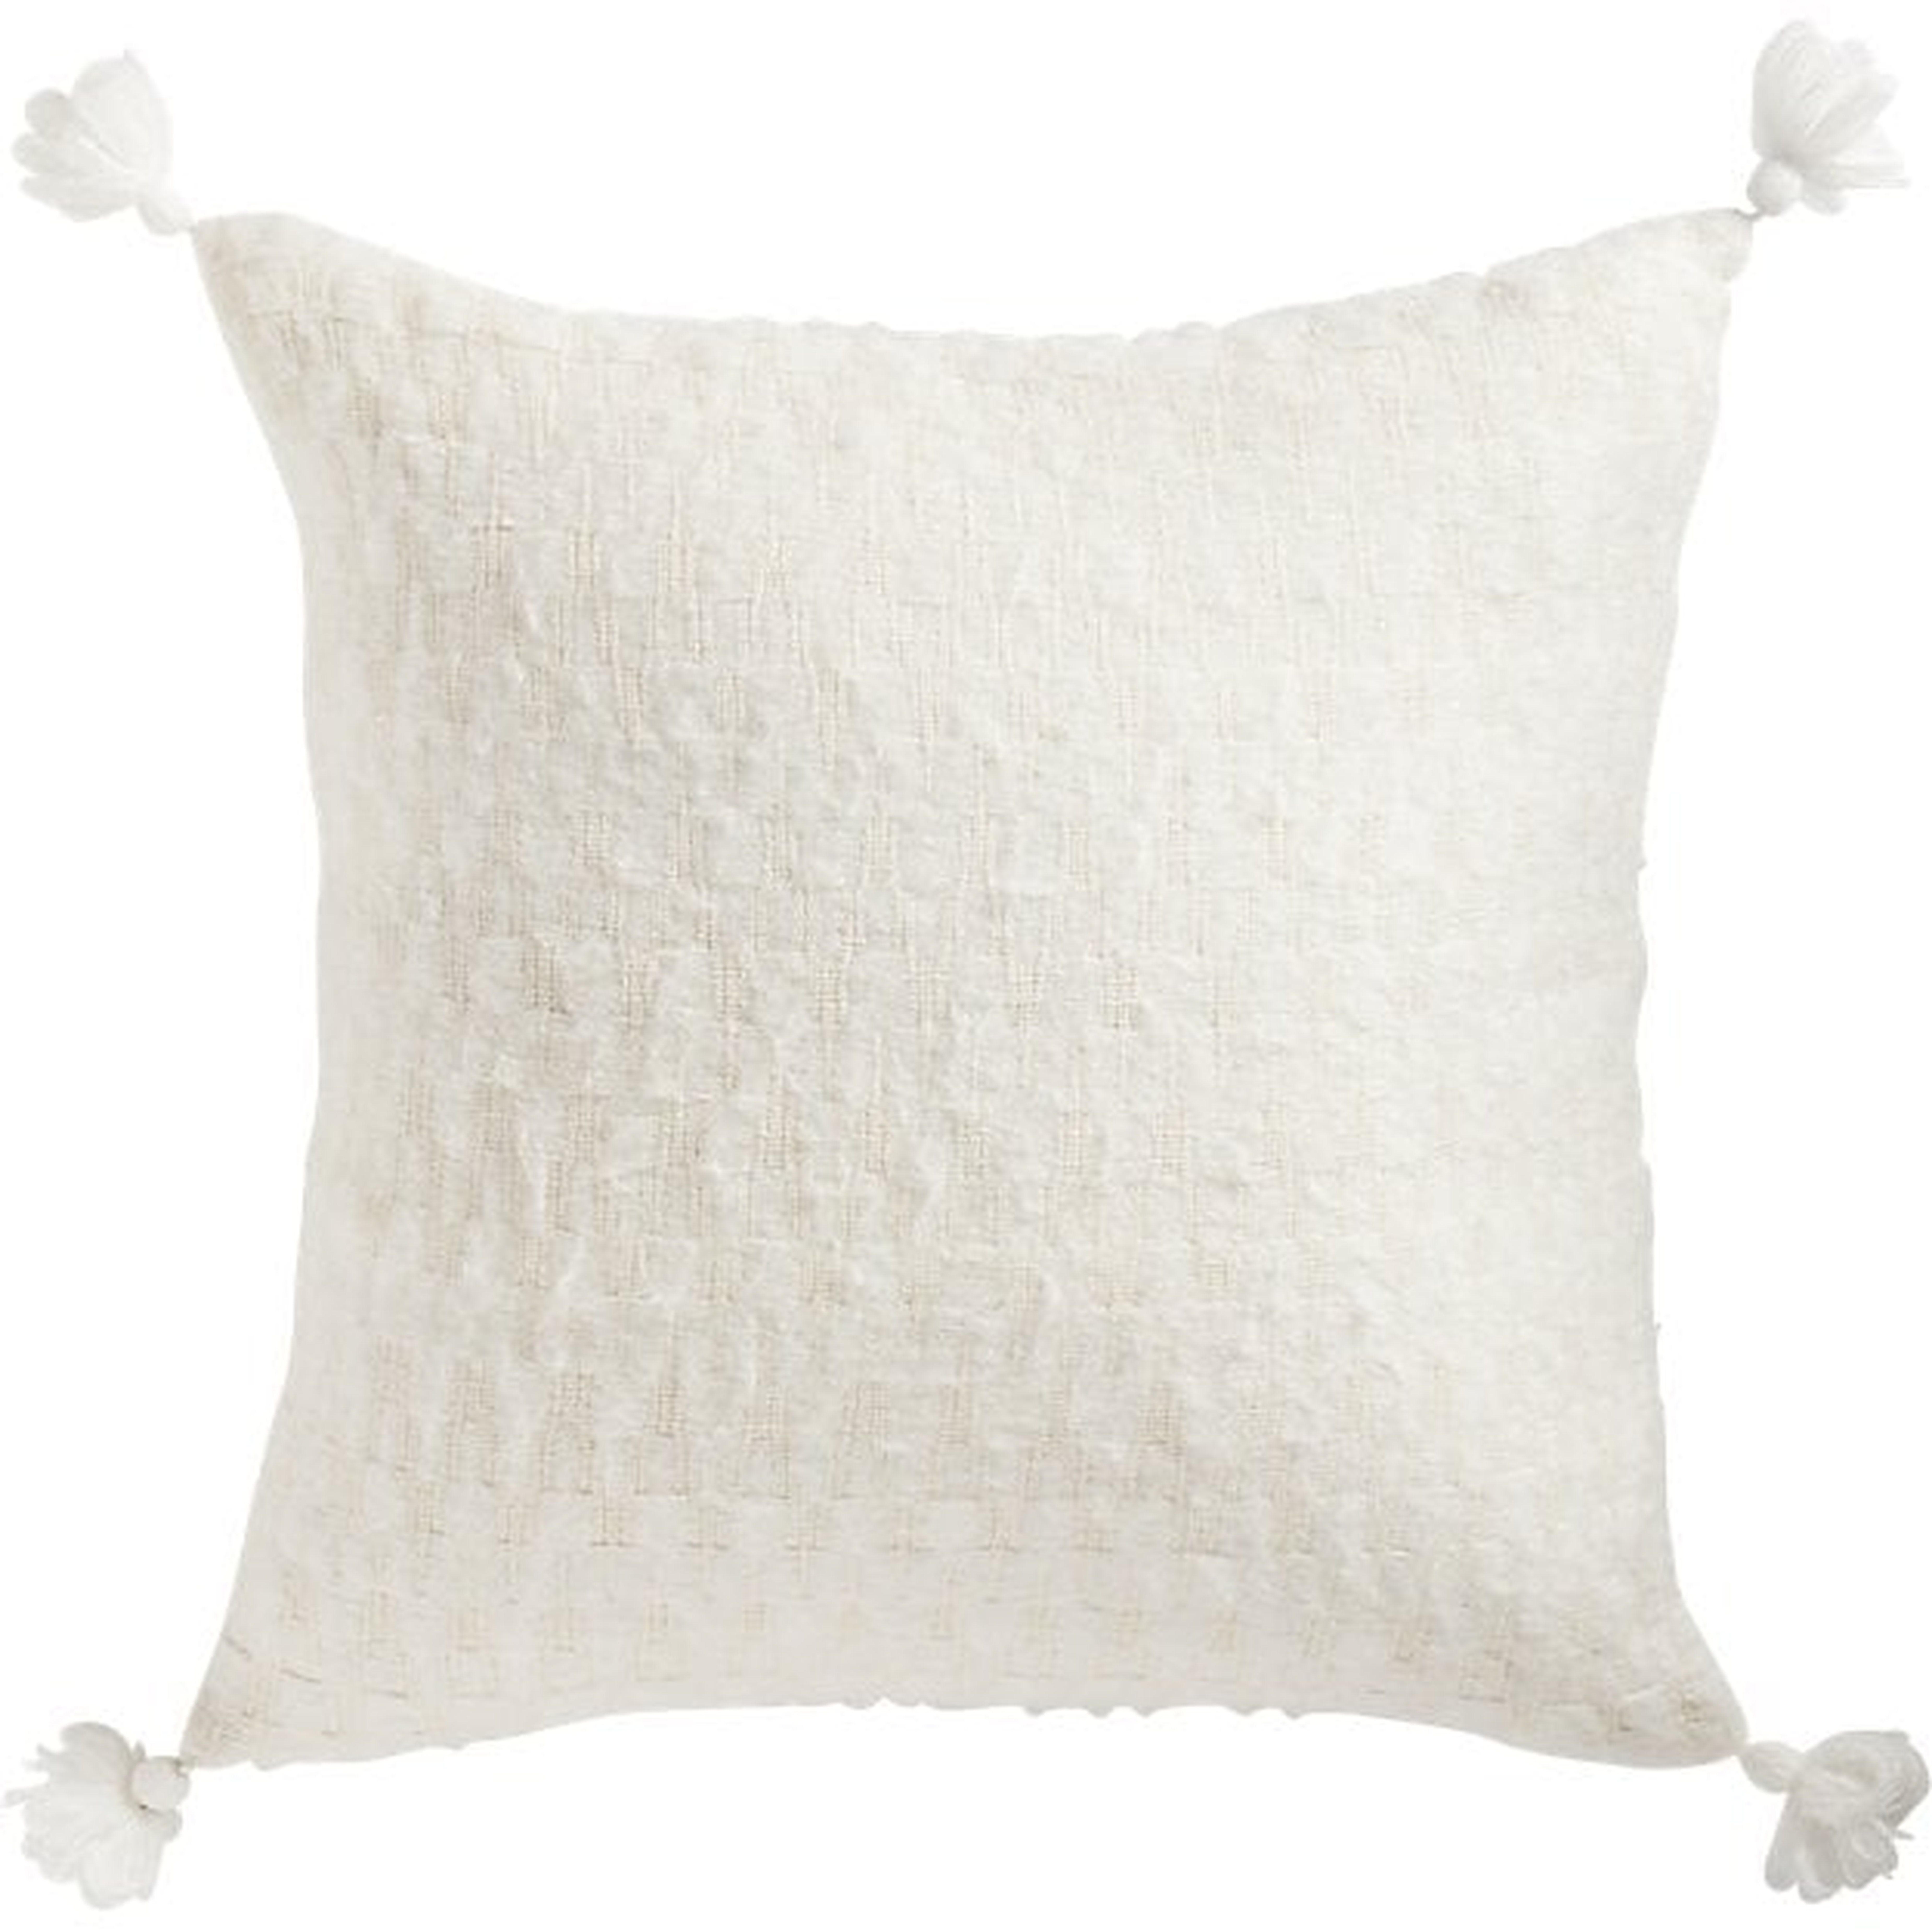 23" SVEN WHITE TASSEL PILLOW WITH FEATHER-DOWN INSERT - CB2